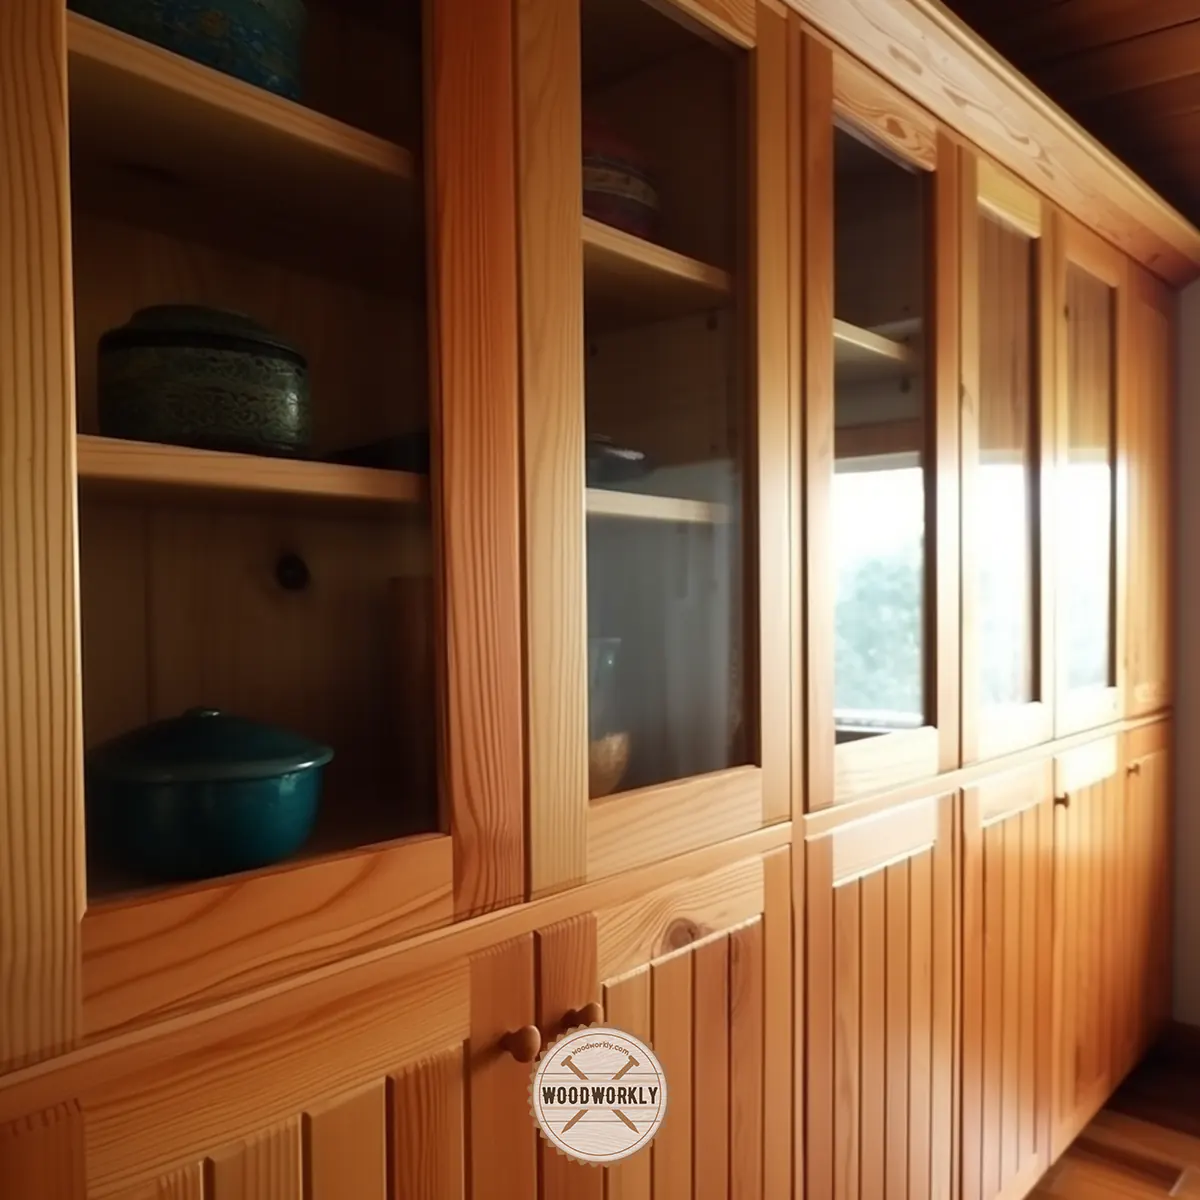 Stained Douglas fir kitchen cabinet